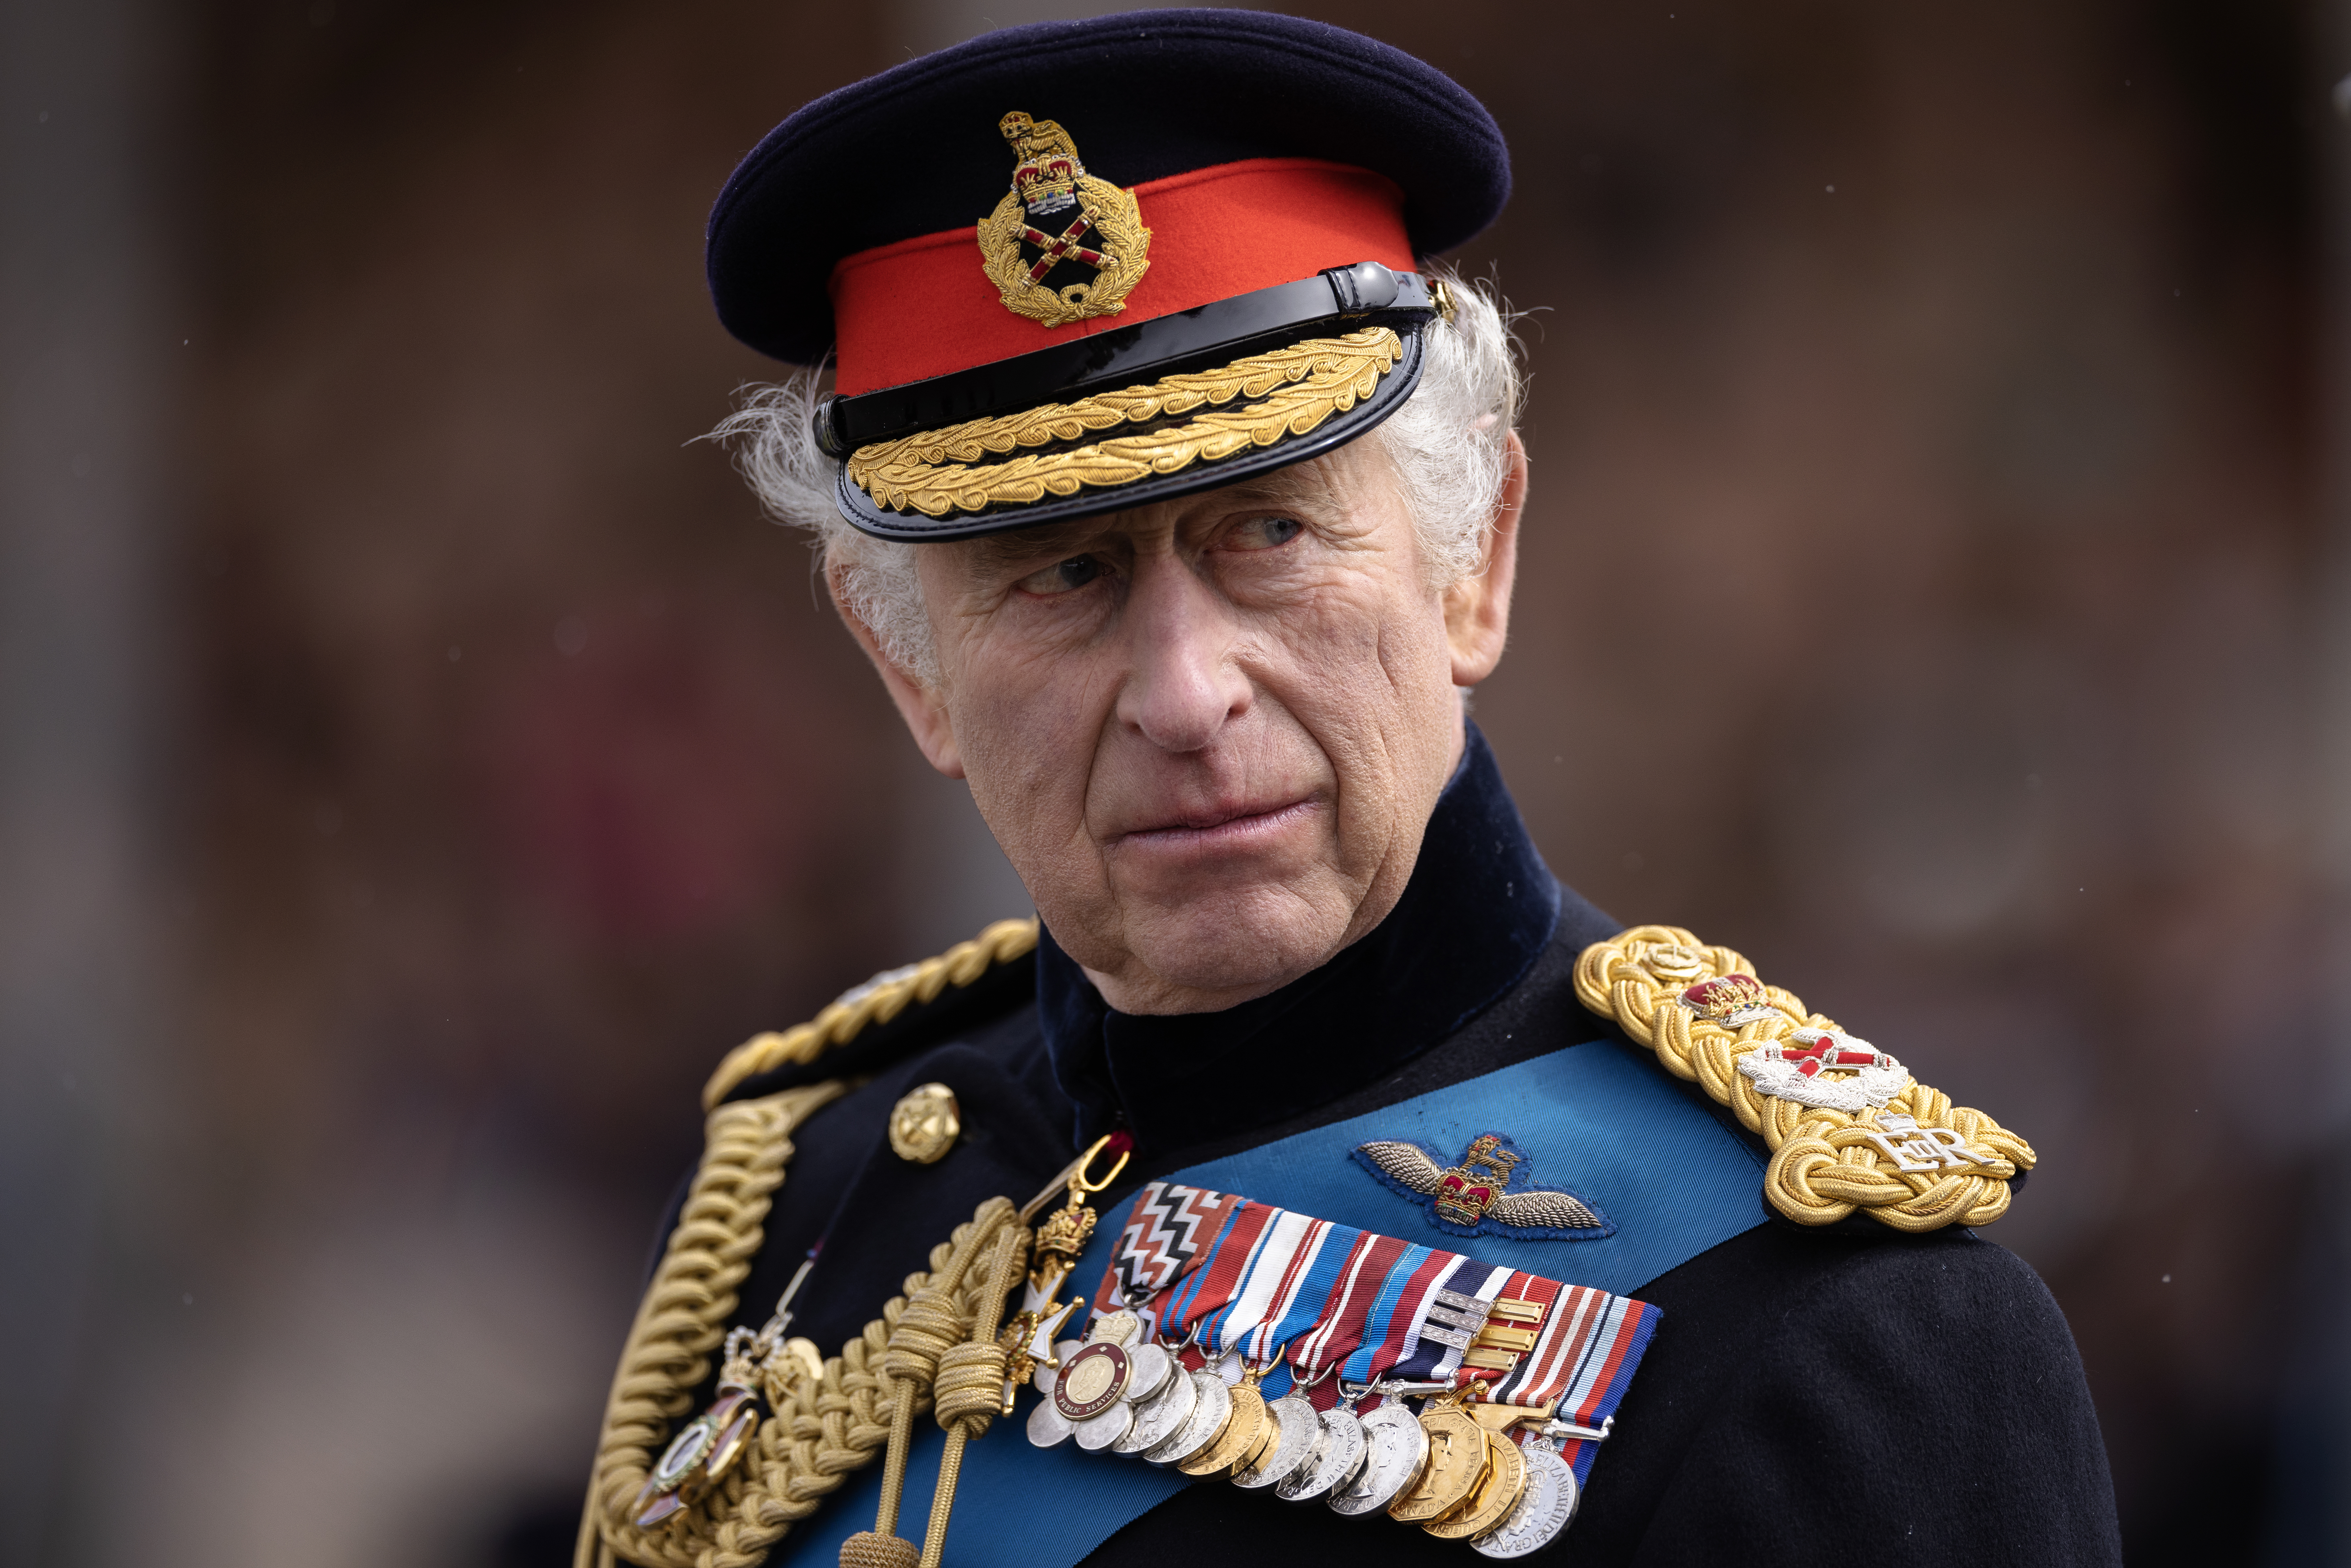 King Charles III inspects the 200th Sovereign's parade at Royal Military Academy Sandhurst on April 14, 2023 in Camberley, England | Source: Getty Images